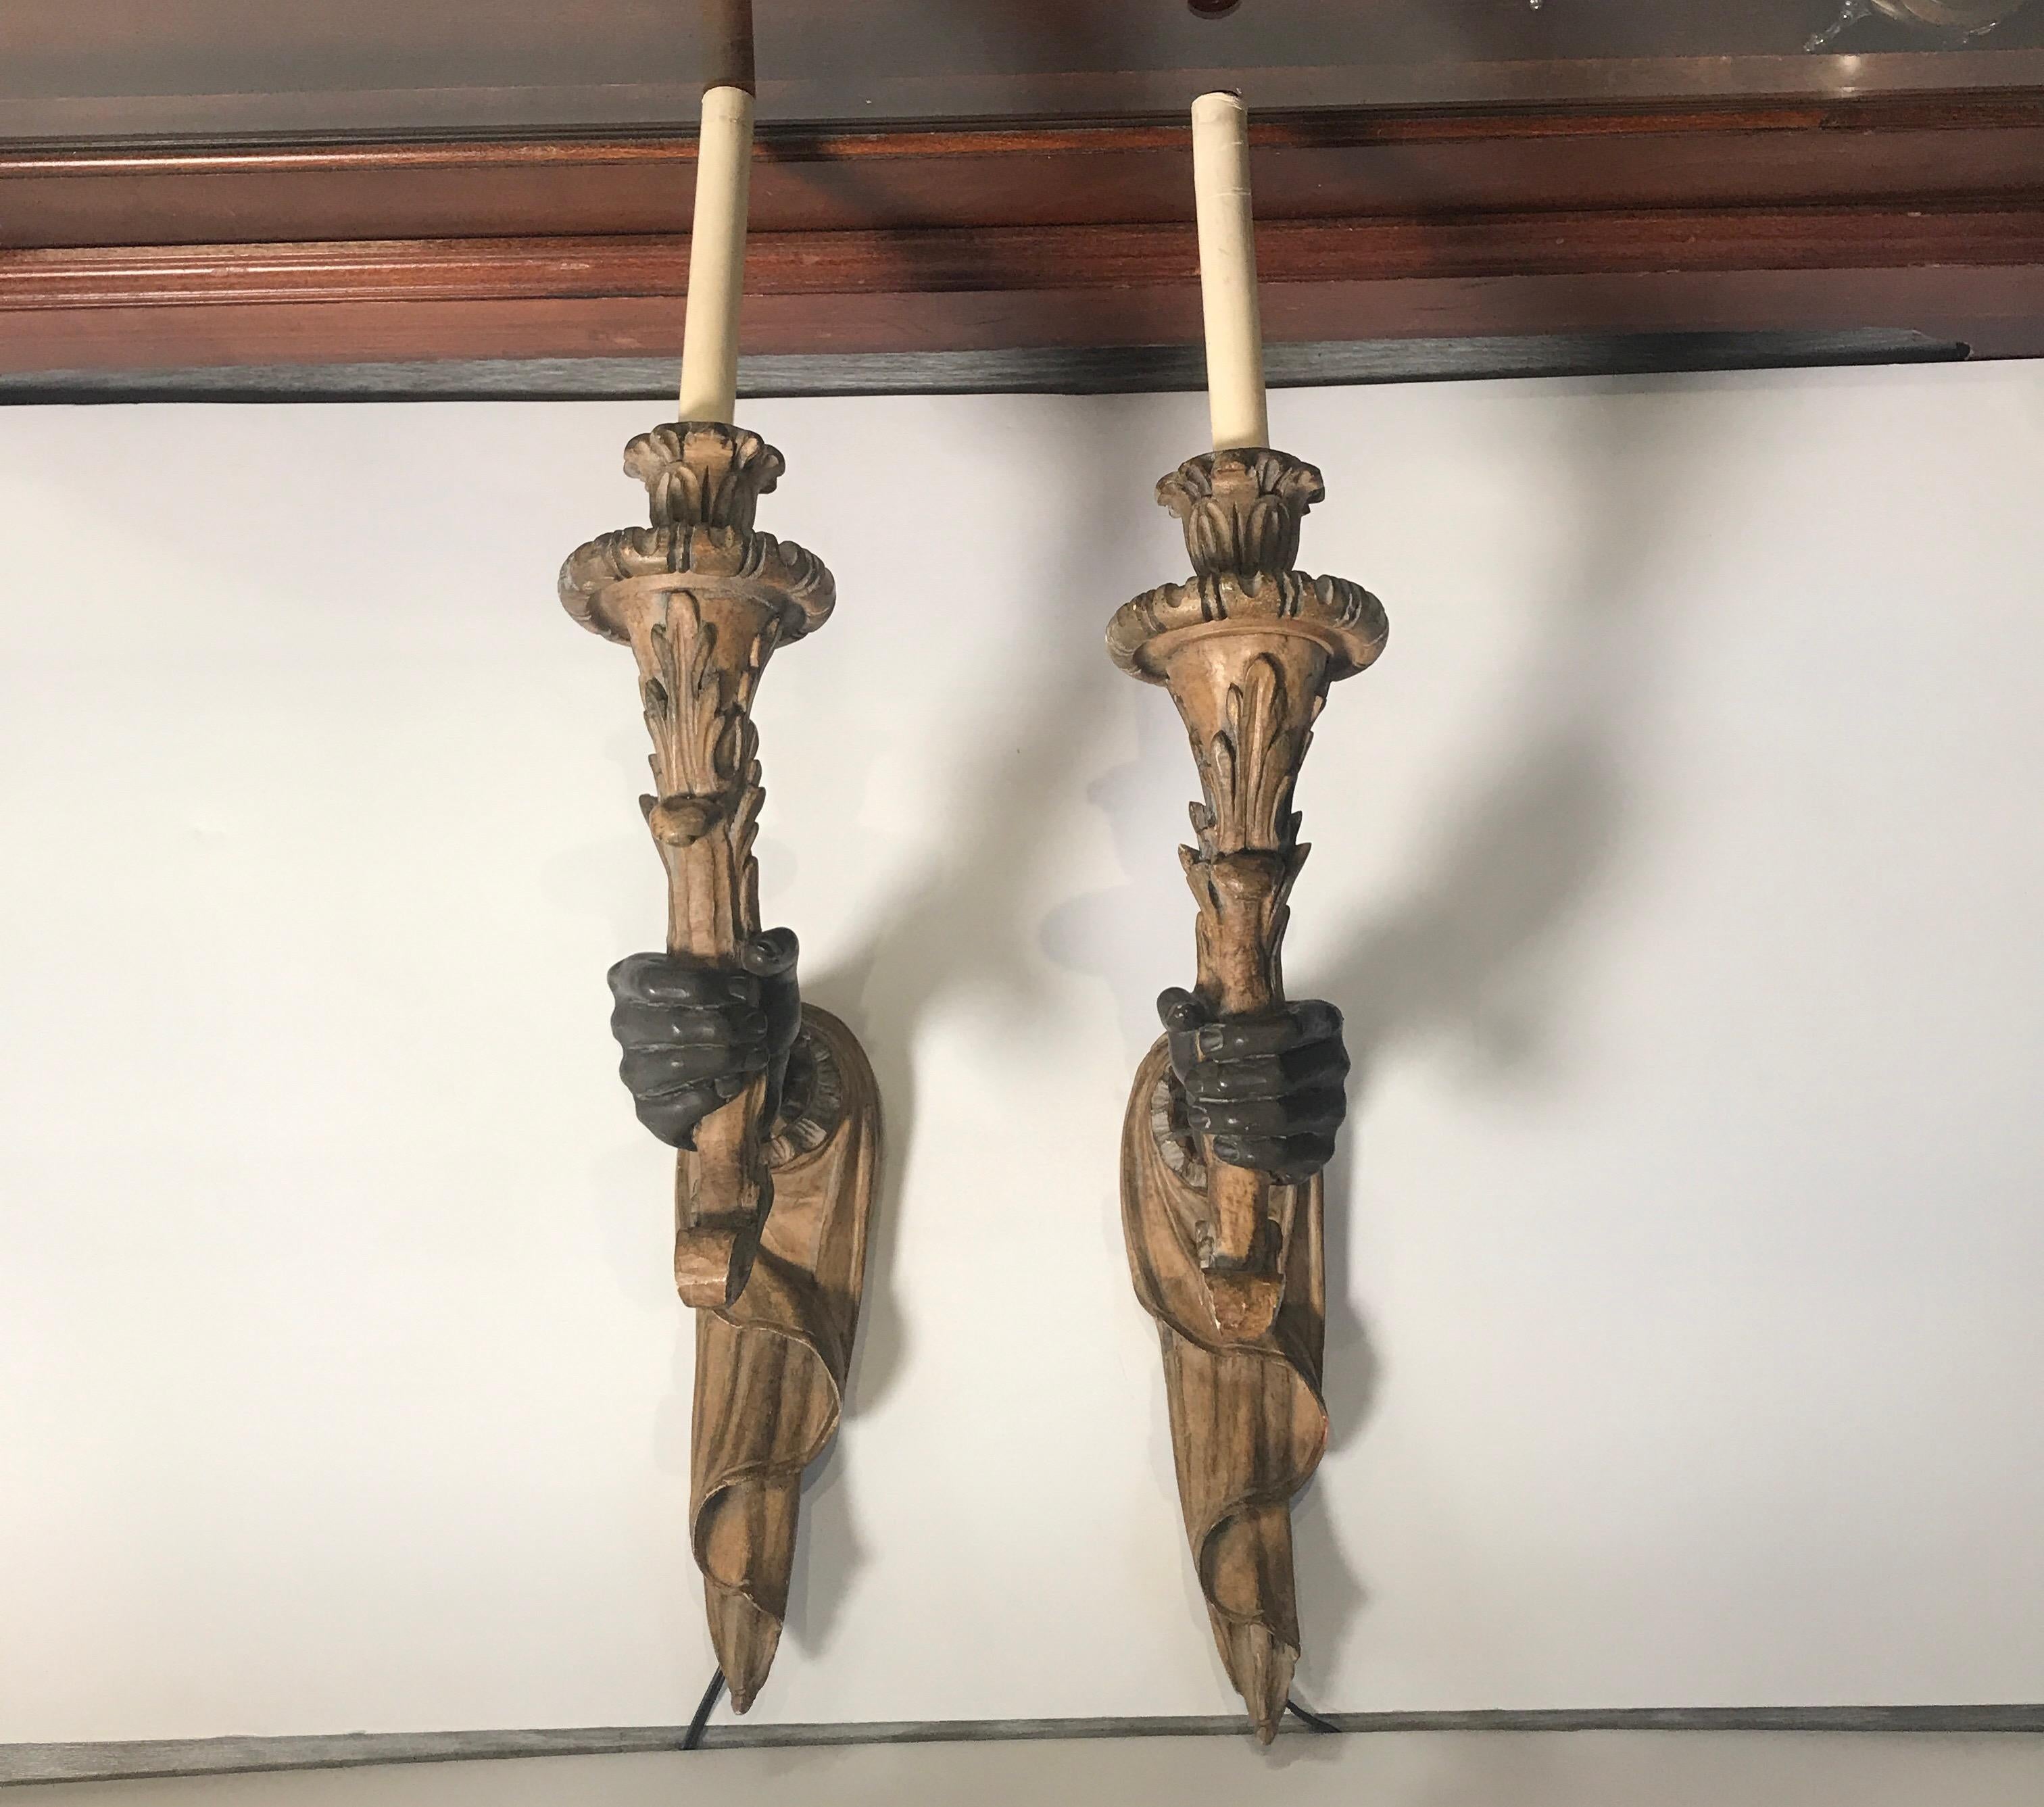 Composition Pair of Venetian 18th Century Style Hand Sconces